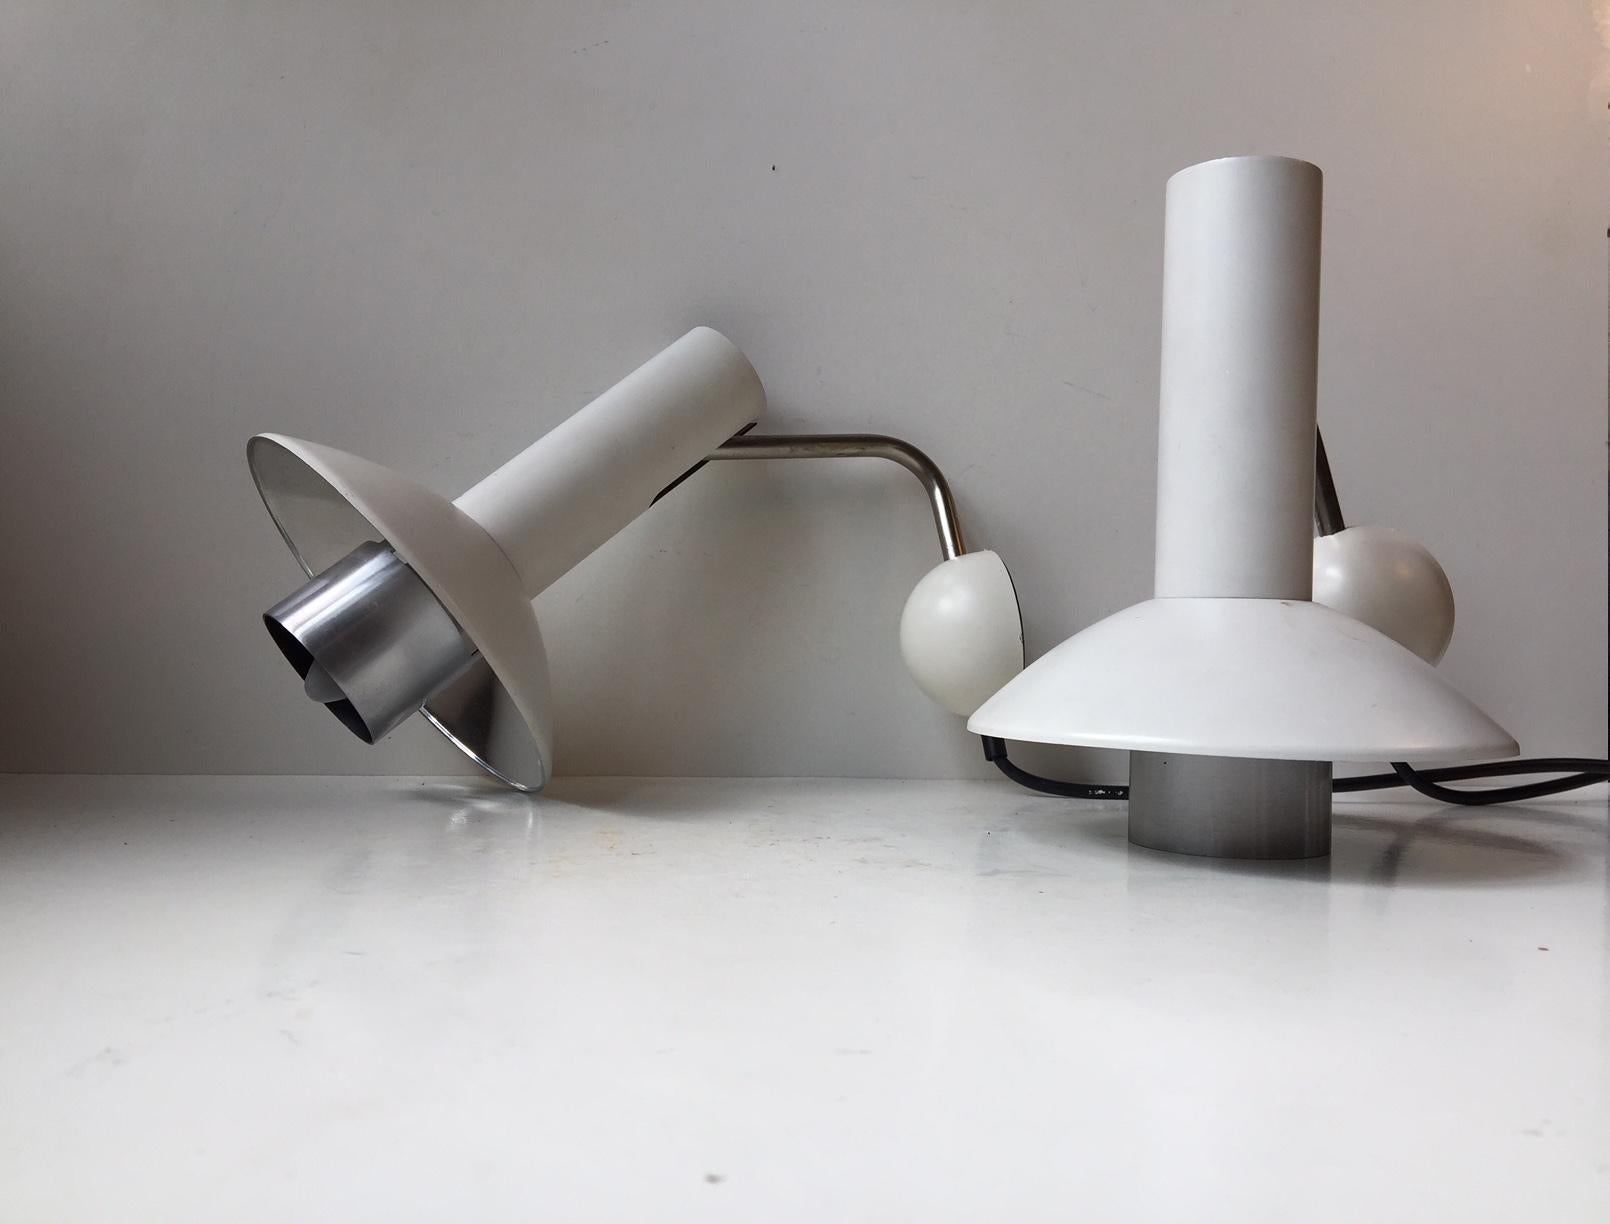 A pair of rare white wall lights designed and manufactured by Louis Poulsen in Denmark during the 1970s. This model: 132051 - is called 'Louise' and is obviously derived from Louis in Louis Poulsen. They are fully adjustable - up/down and side to